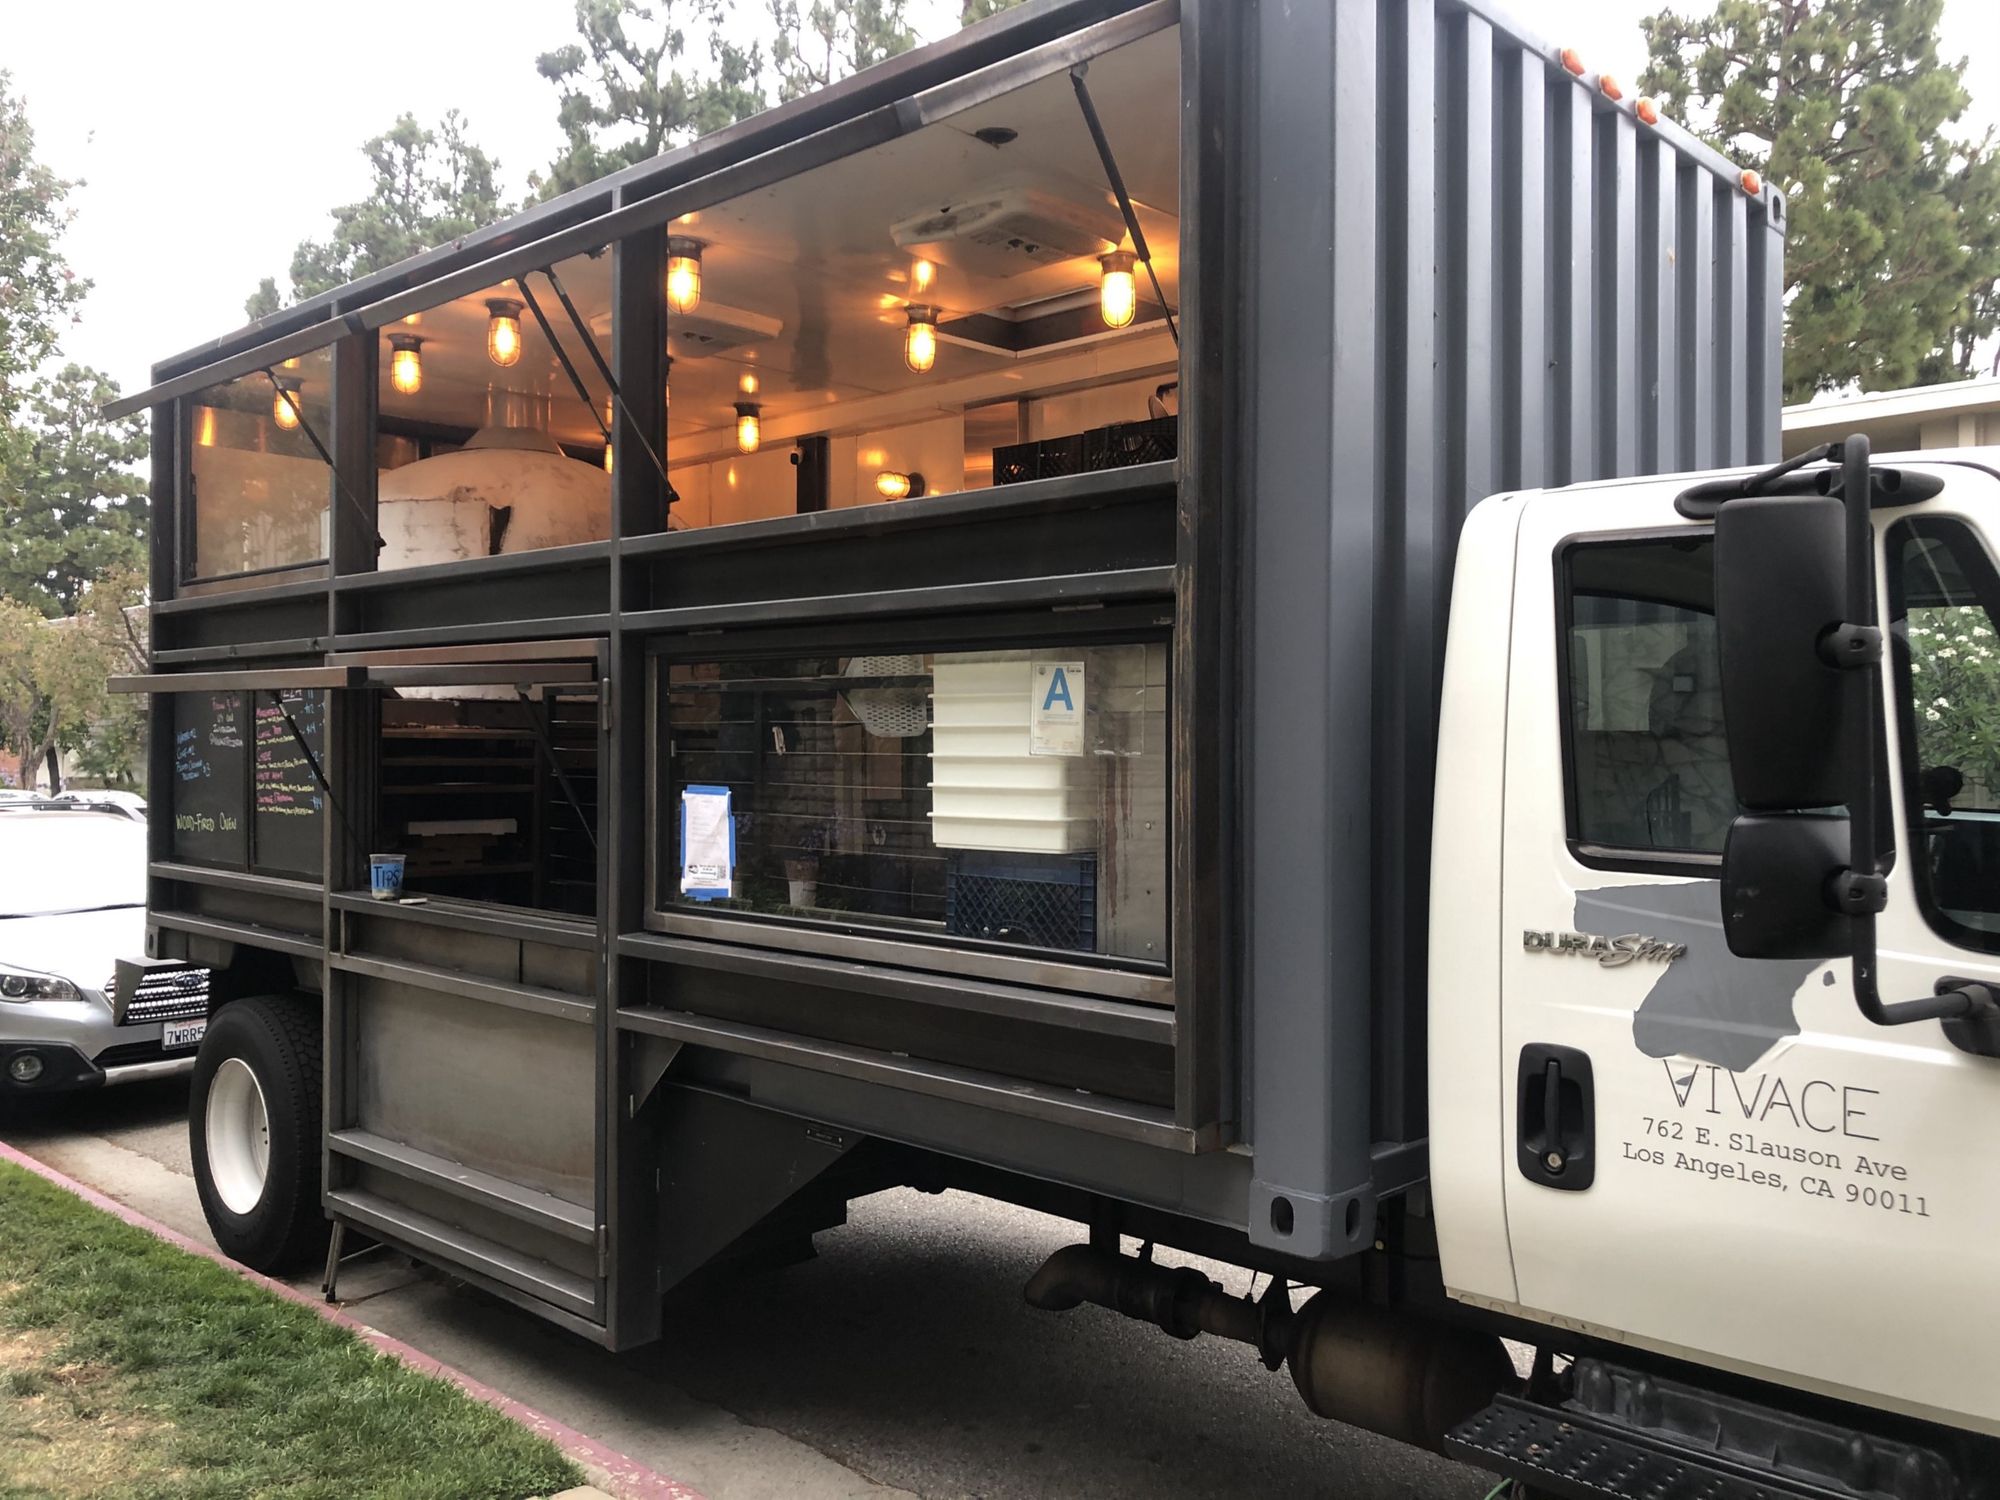 Food Truck Platform Brings Diverse Cuisines Directly To Outer Suburbs